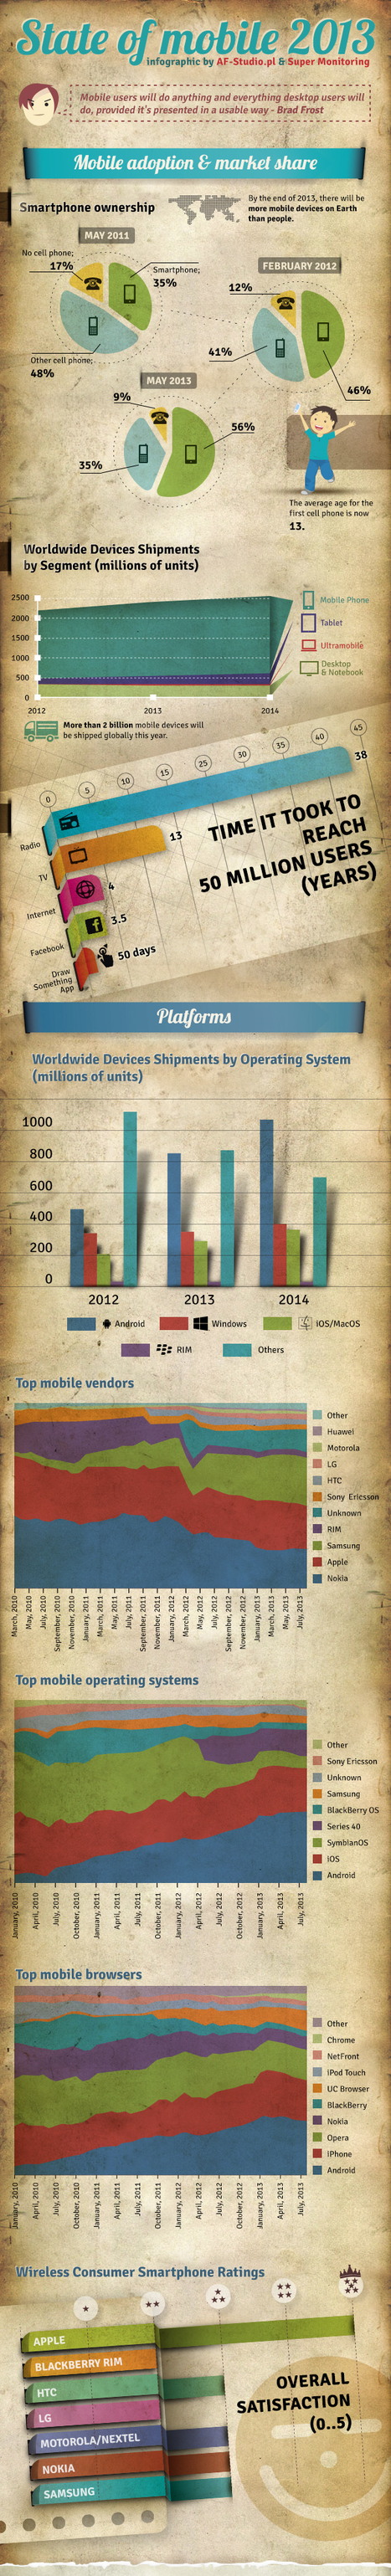 Infographic: Everything You Need to Know About Mobile in 2013 | Education & Numérique | Scoop.it